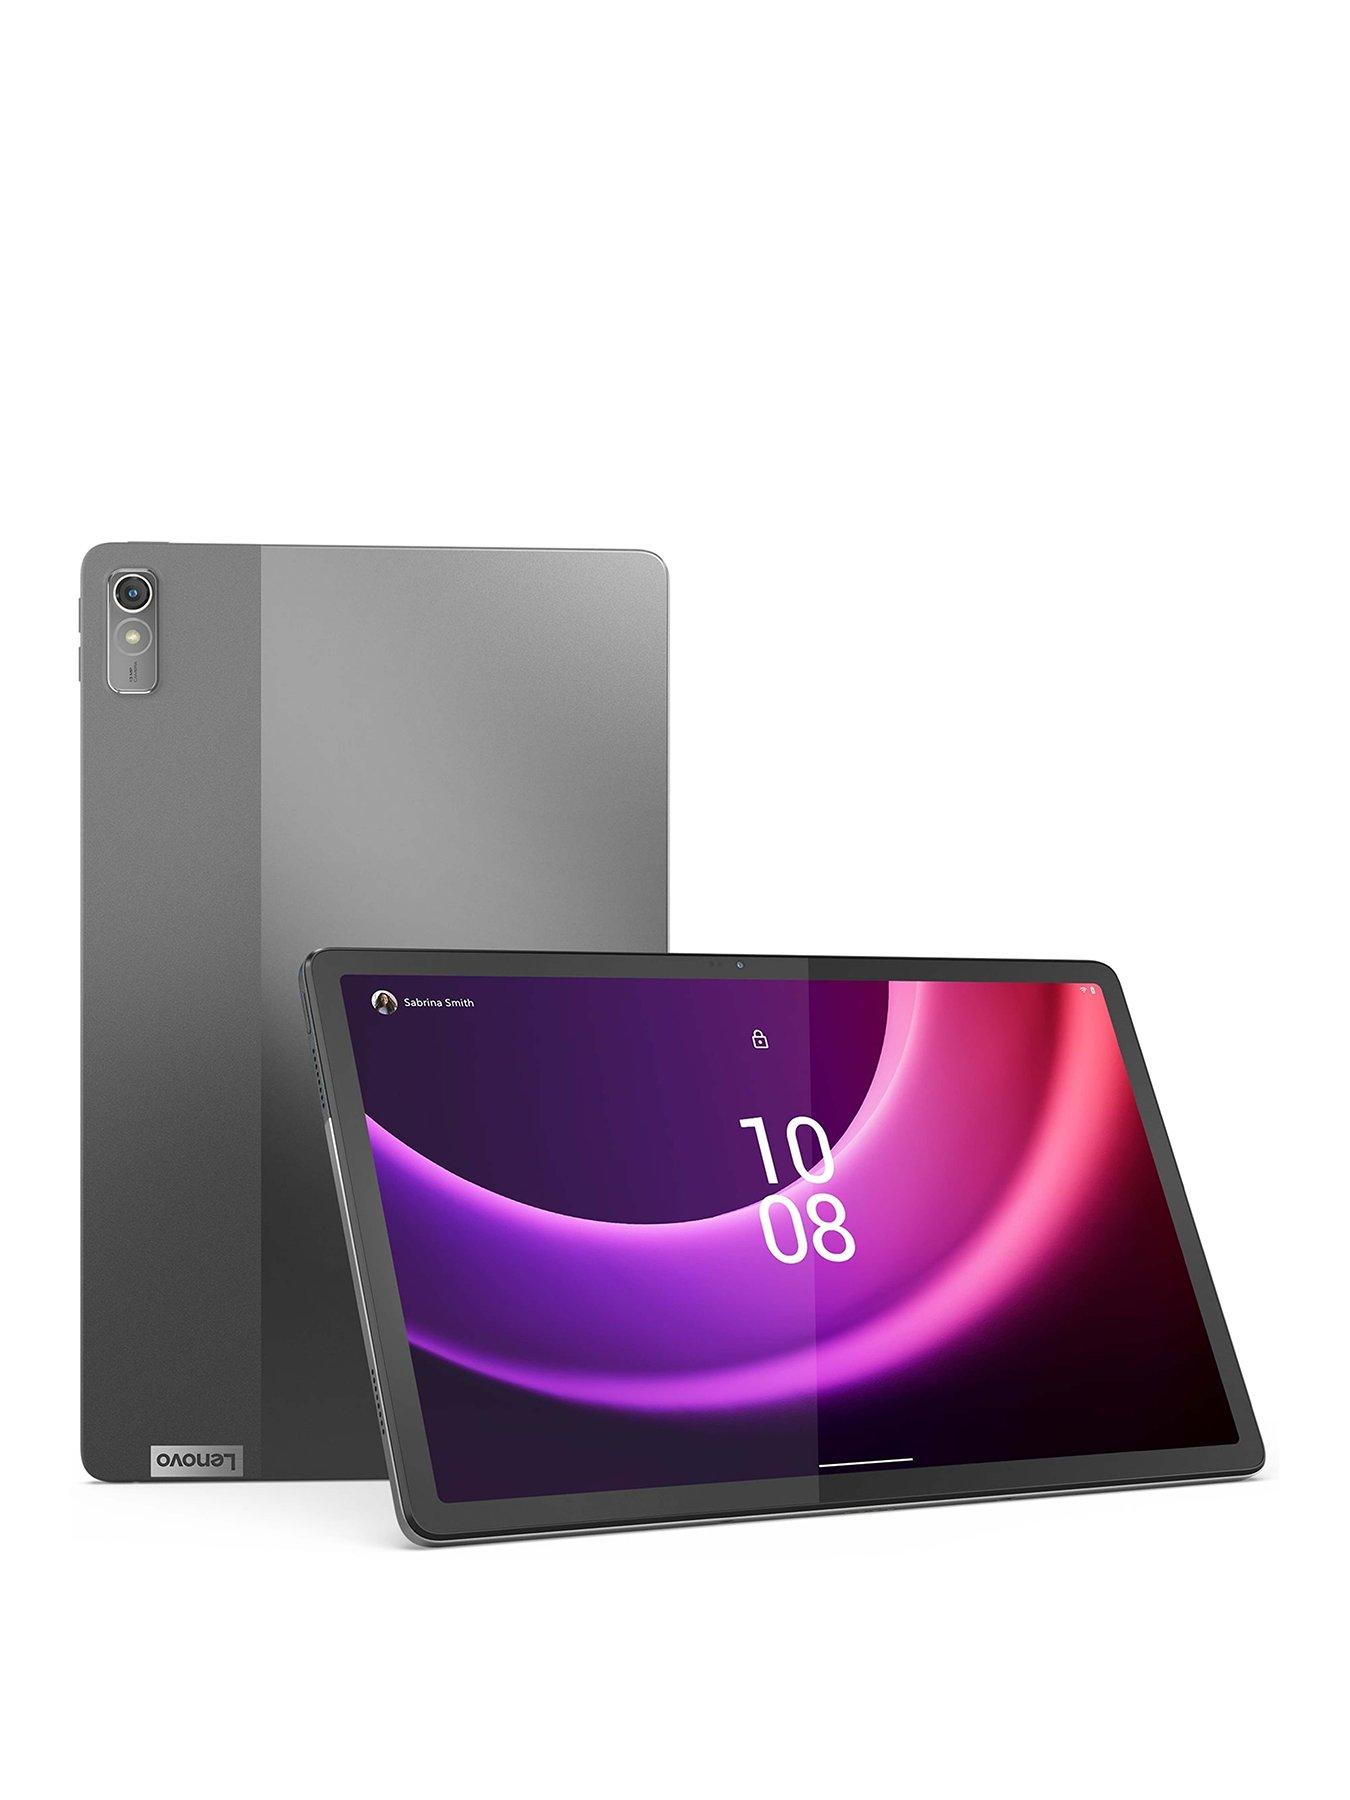 The Lenovo Tab P12 is ready for back-to-school season